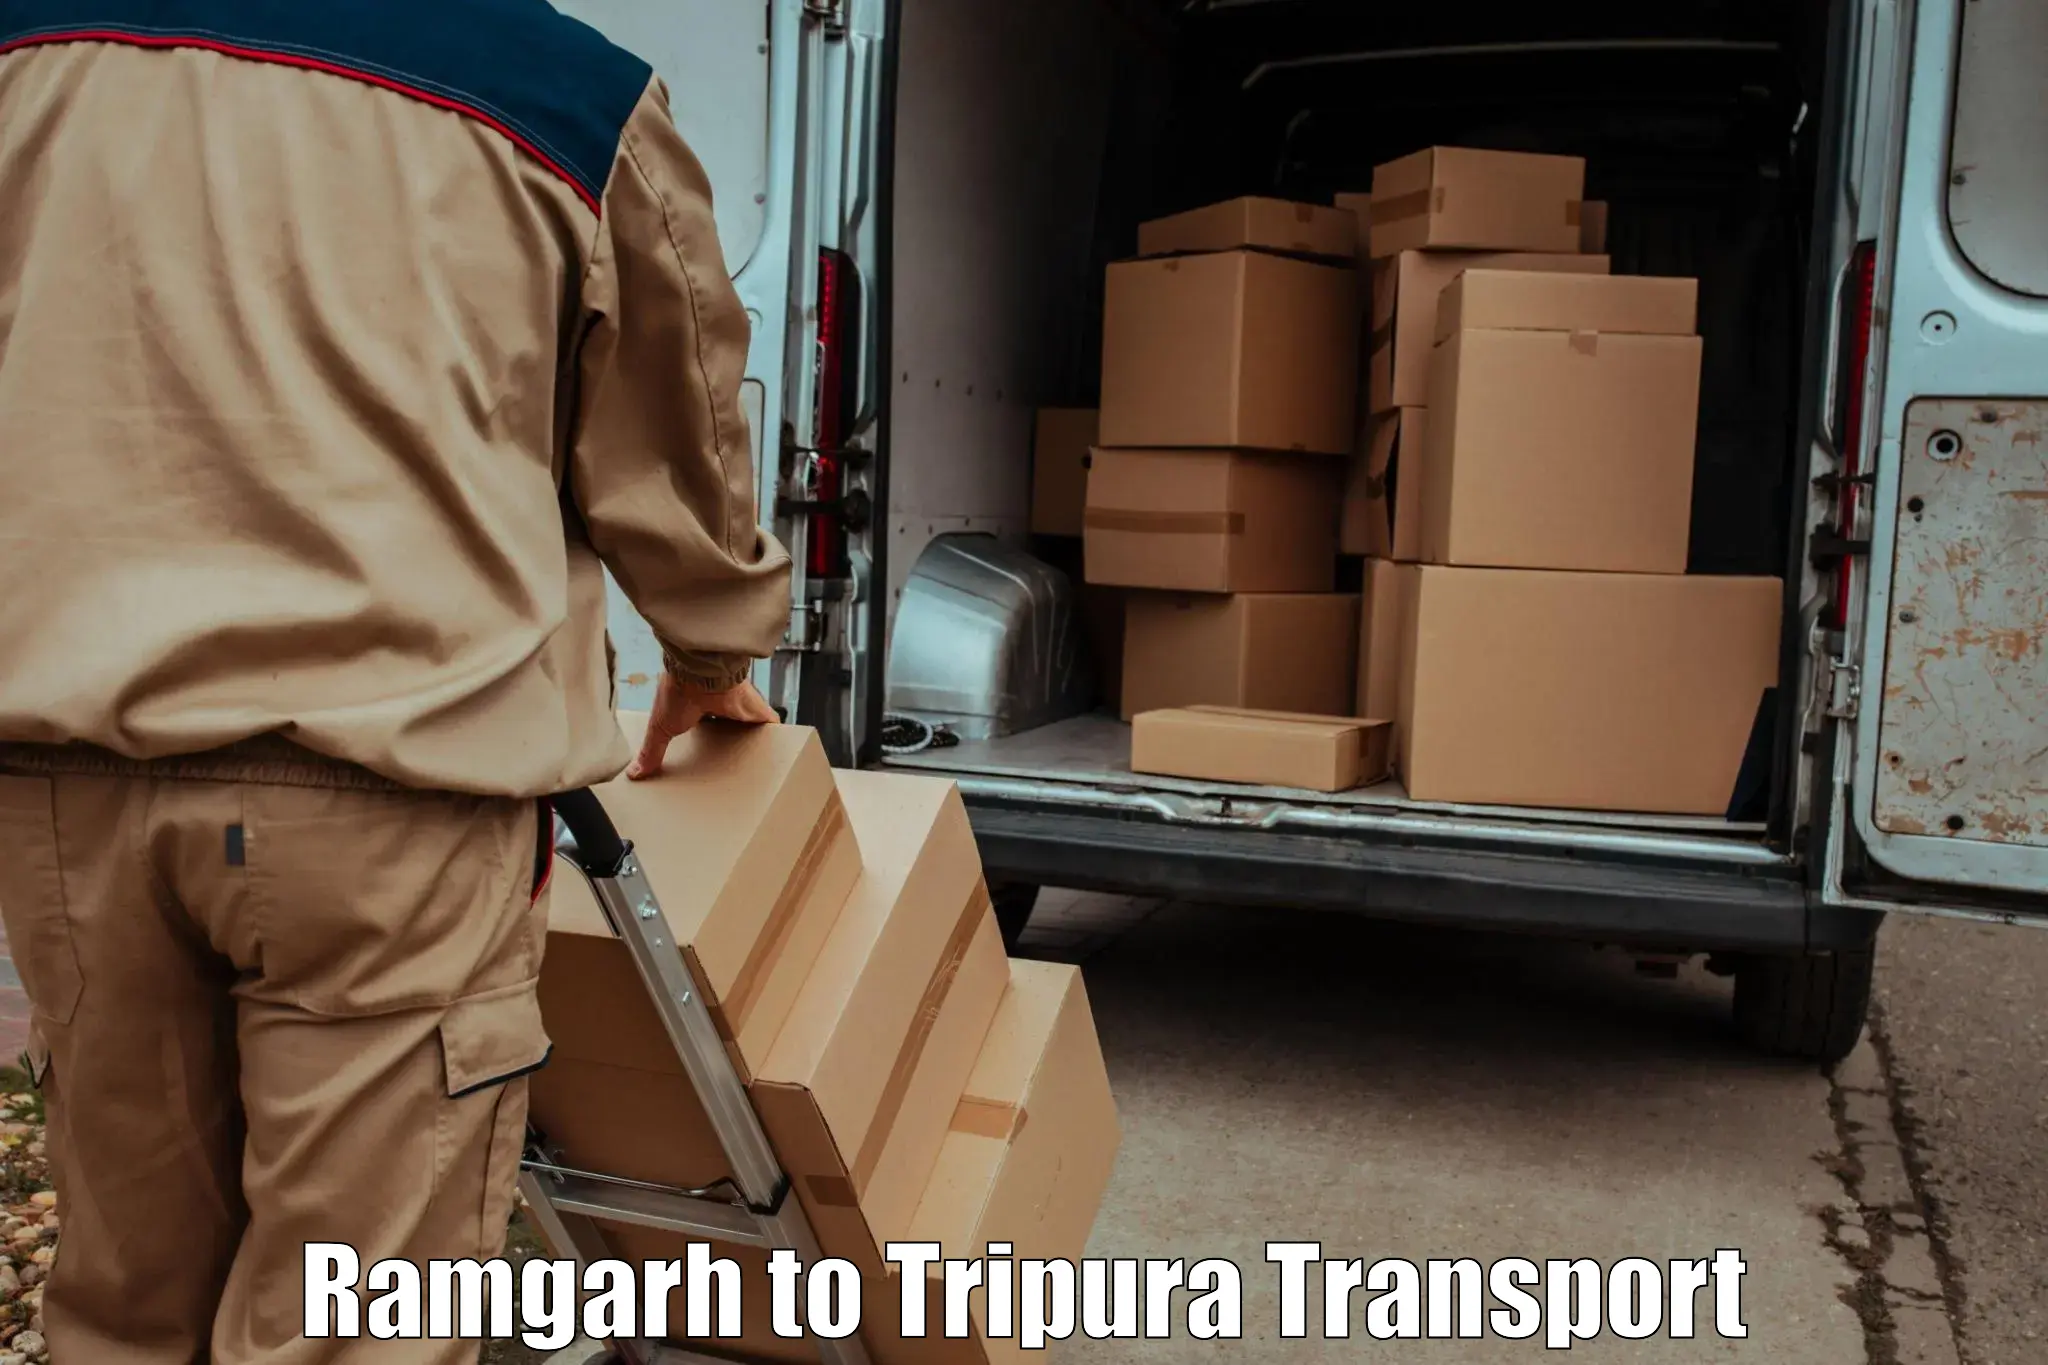 Two wheeler transport services Ramgarh to Udaipur Tripura